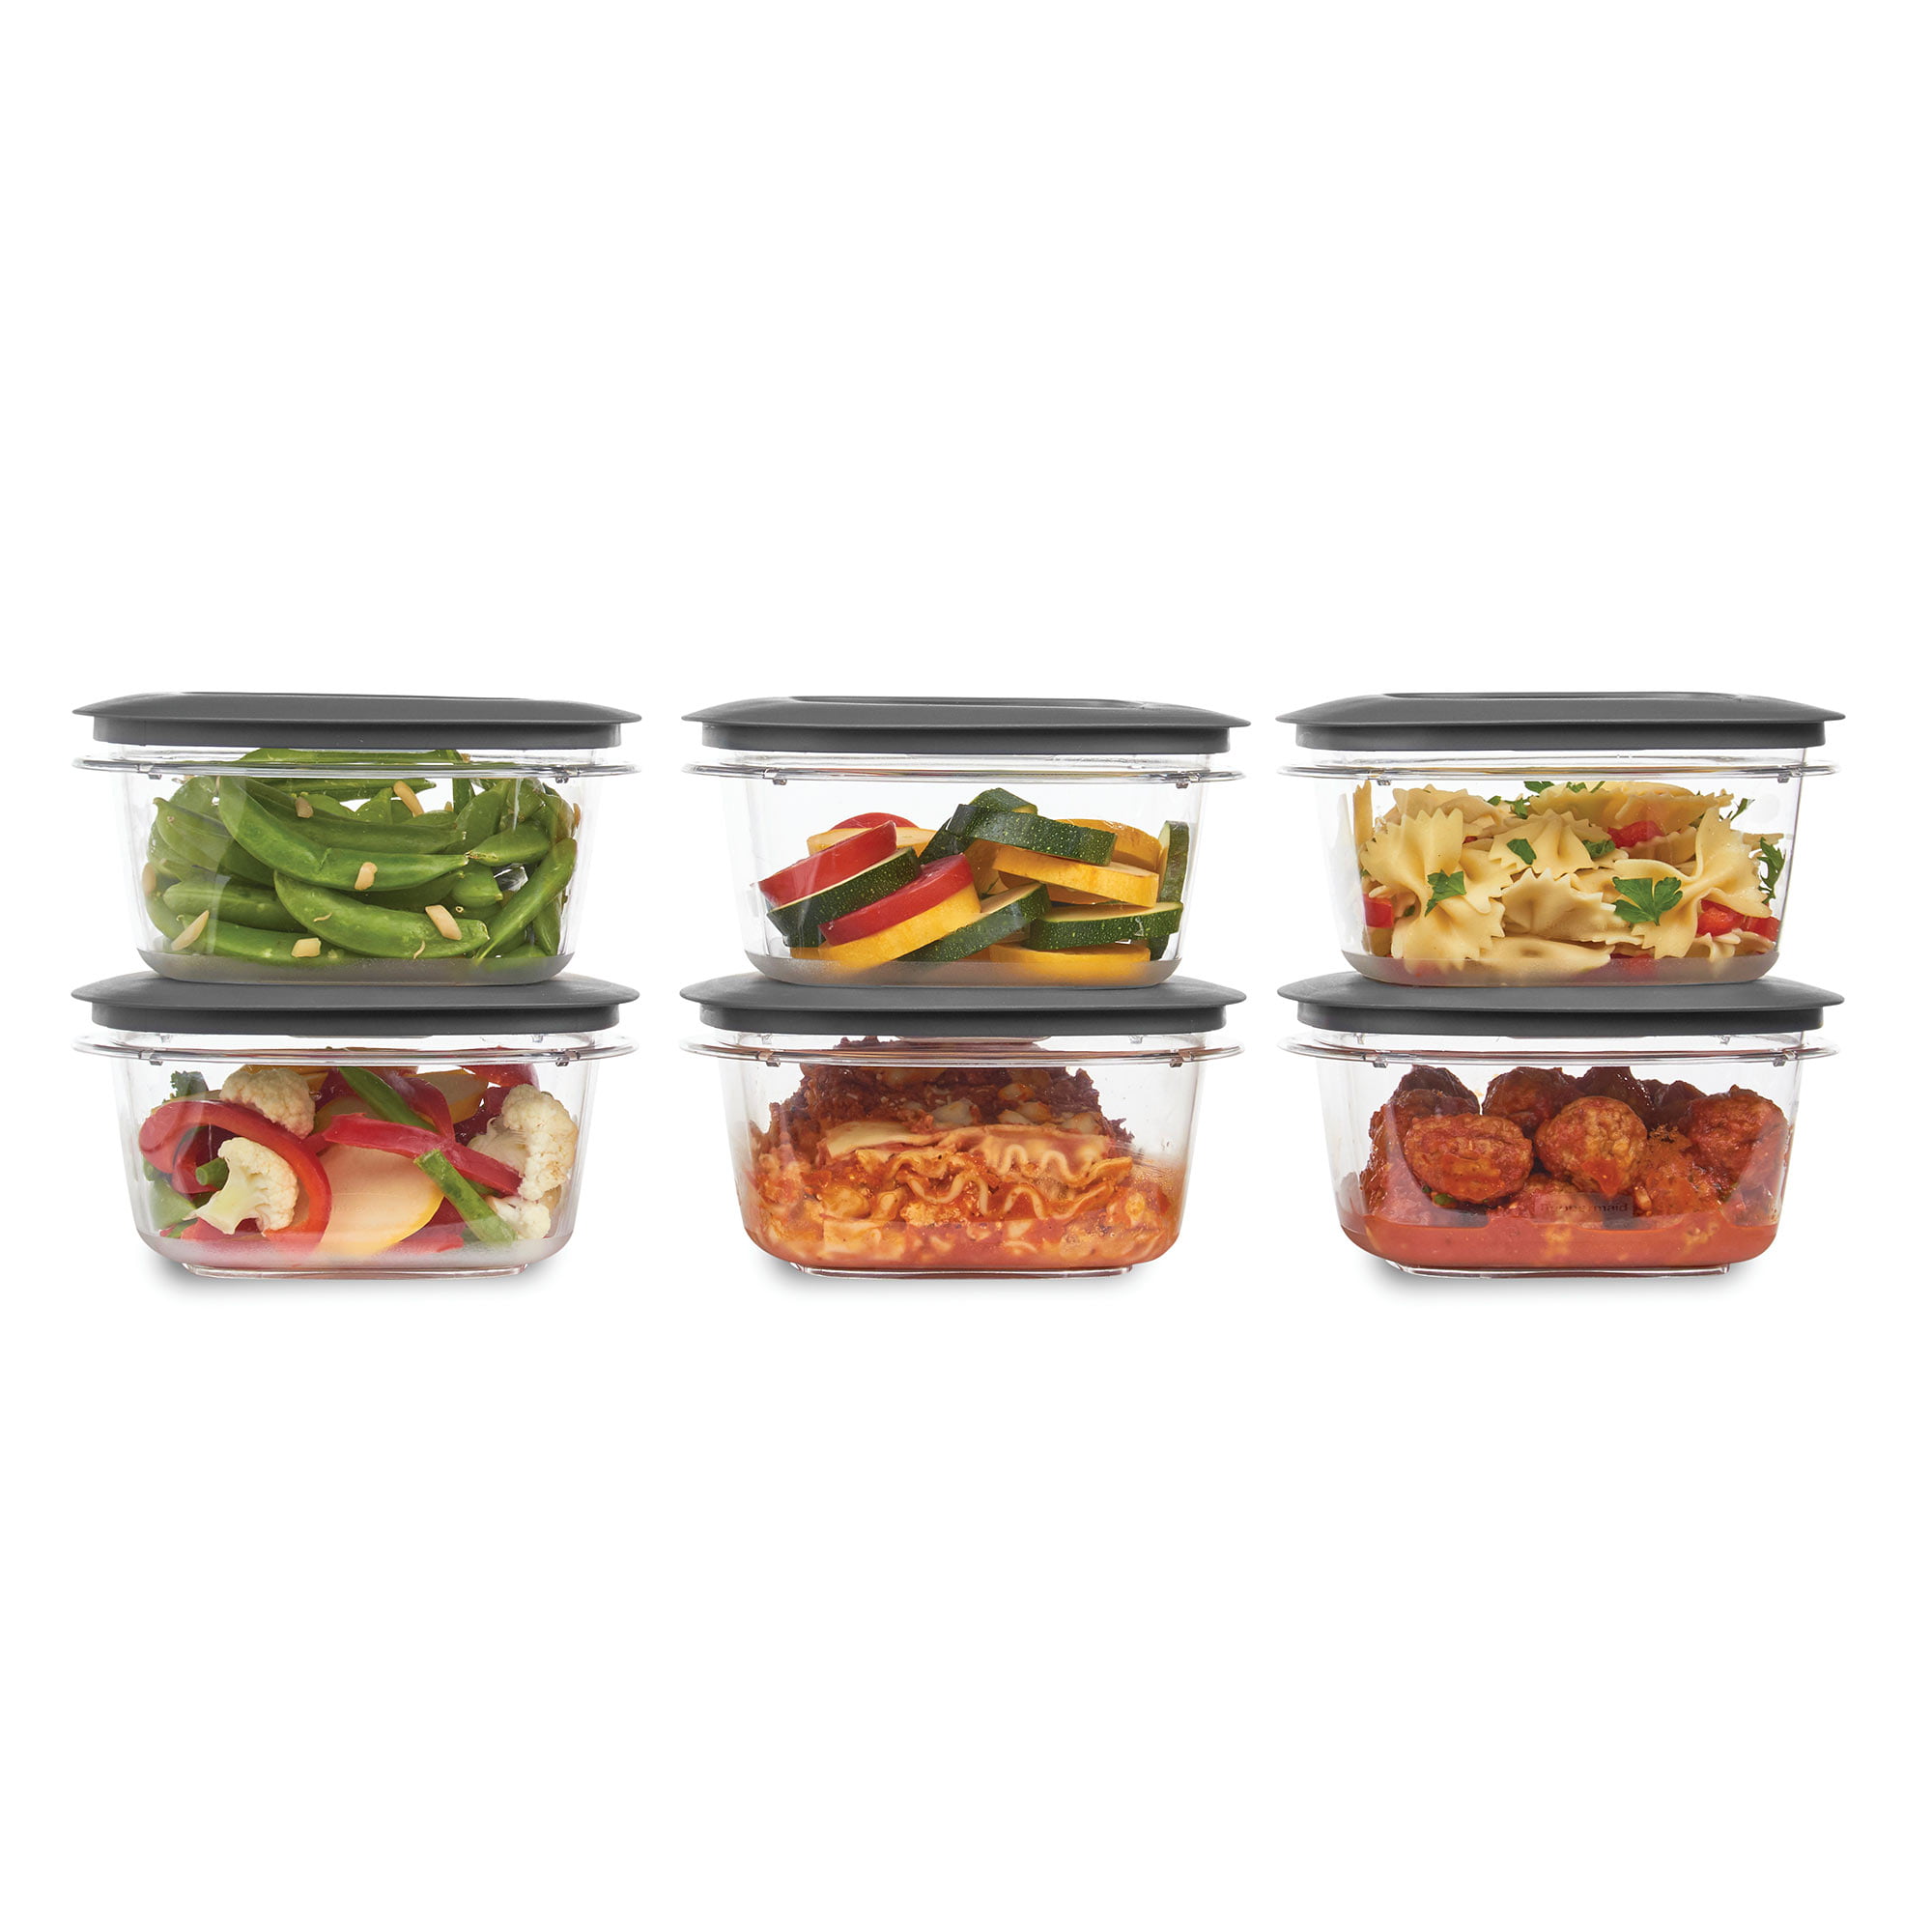 Premier Stain Shield Food Storage Container, 5-Cup - Staples, MN